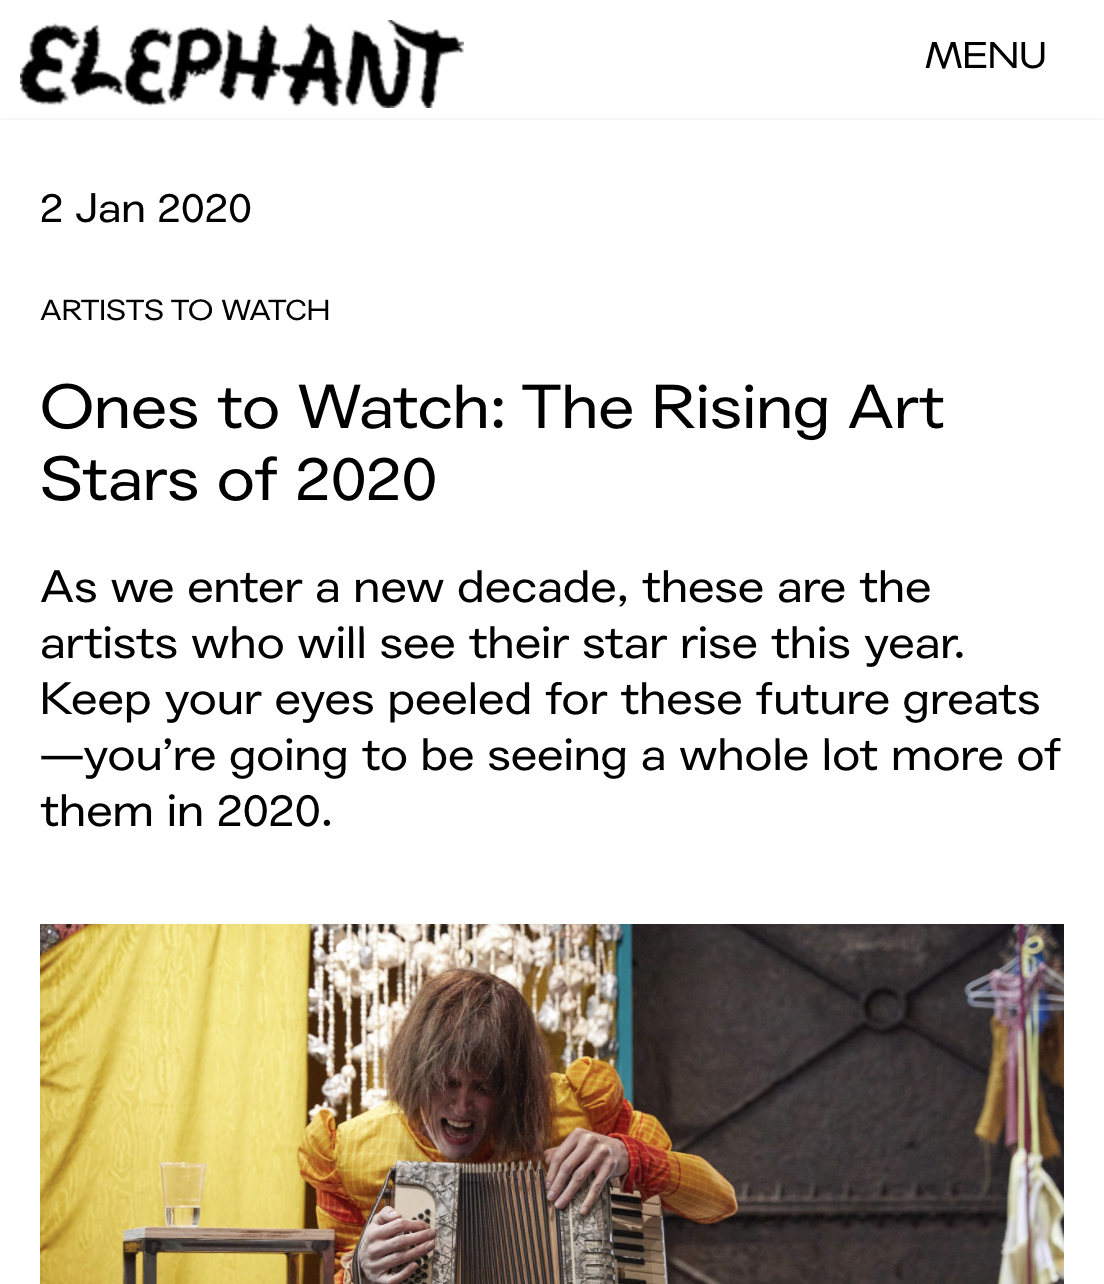 Ones to Watch: The Rising Art Stars of 2020